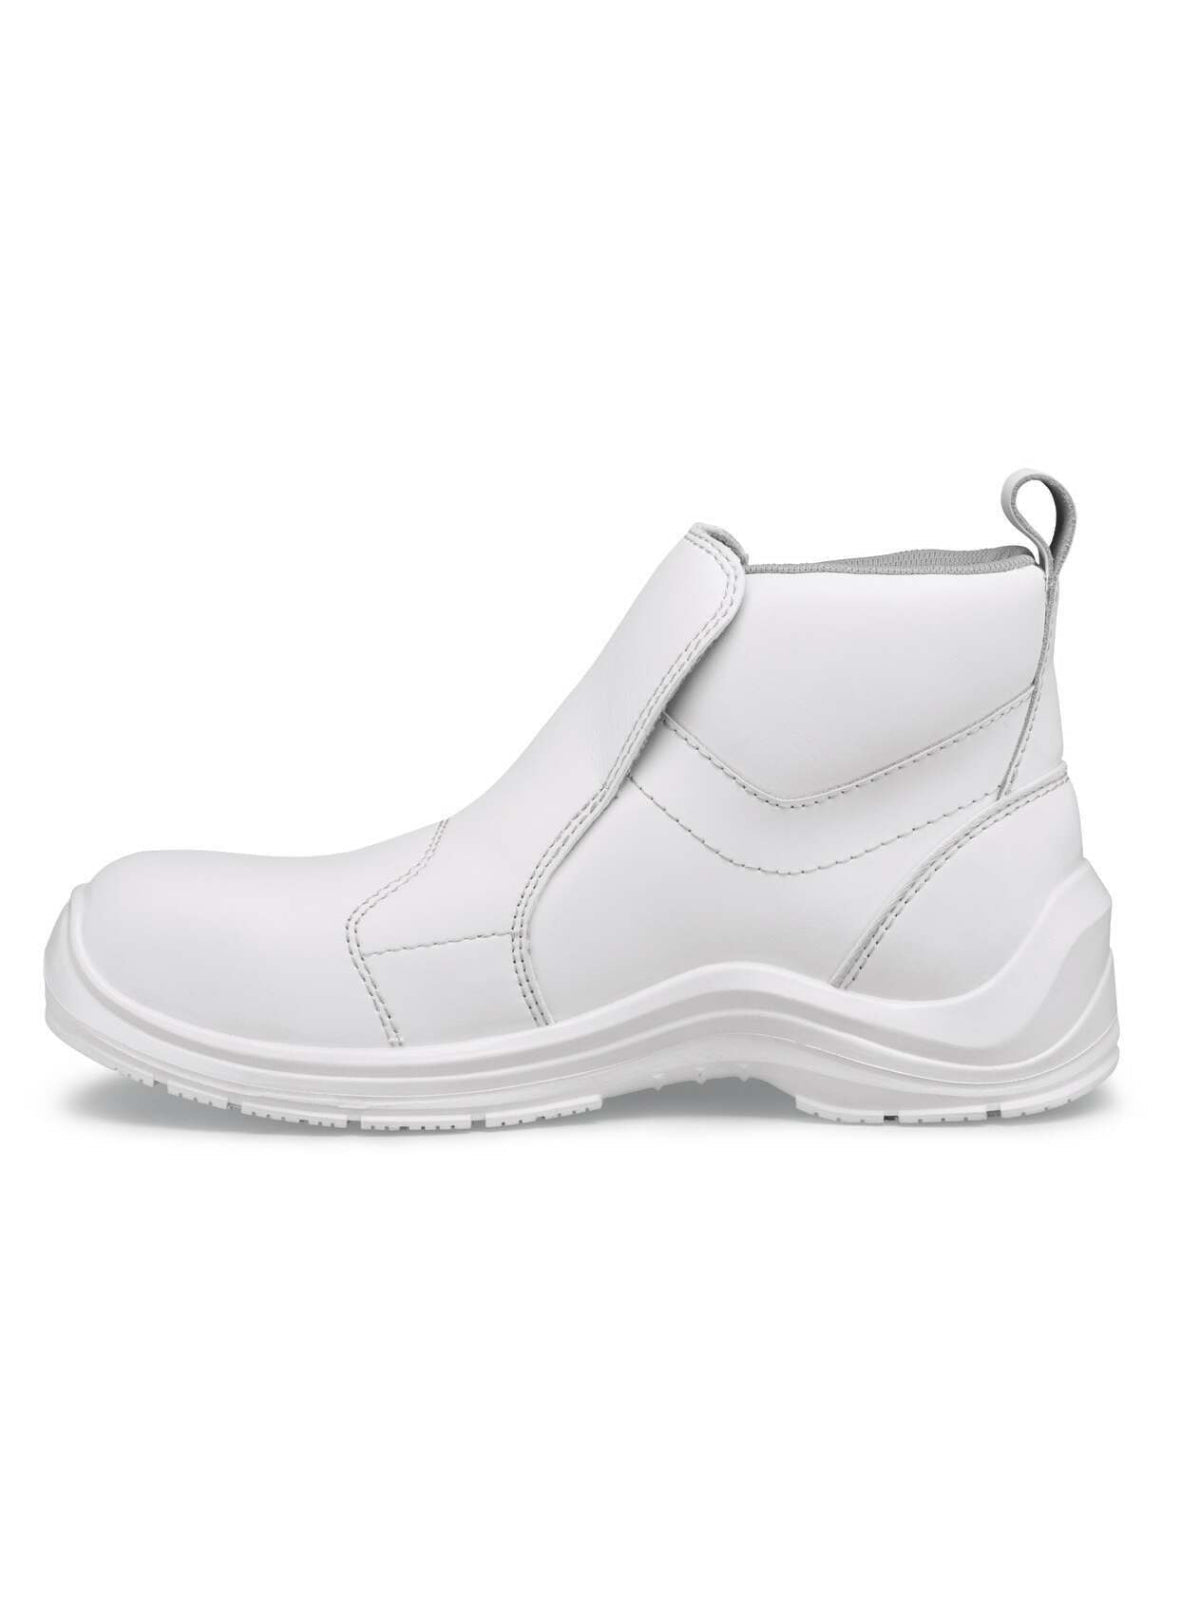 Unisex Safety Shoe Lungo81 (S3) by  Safety Jogger.